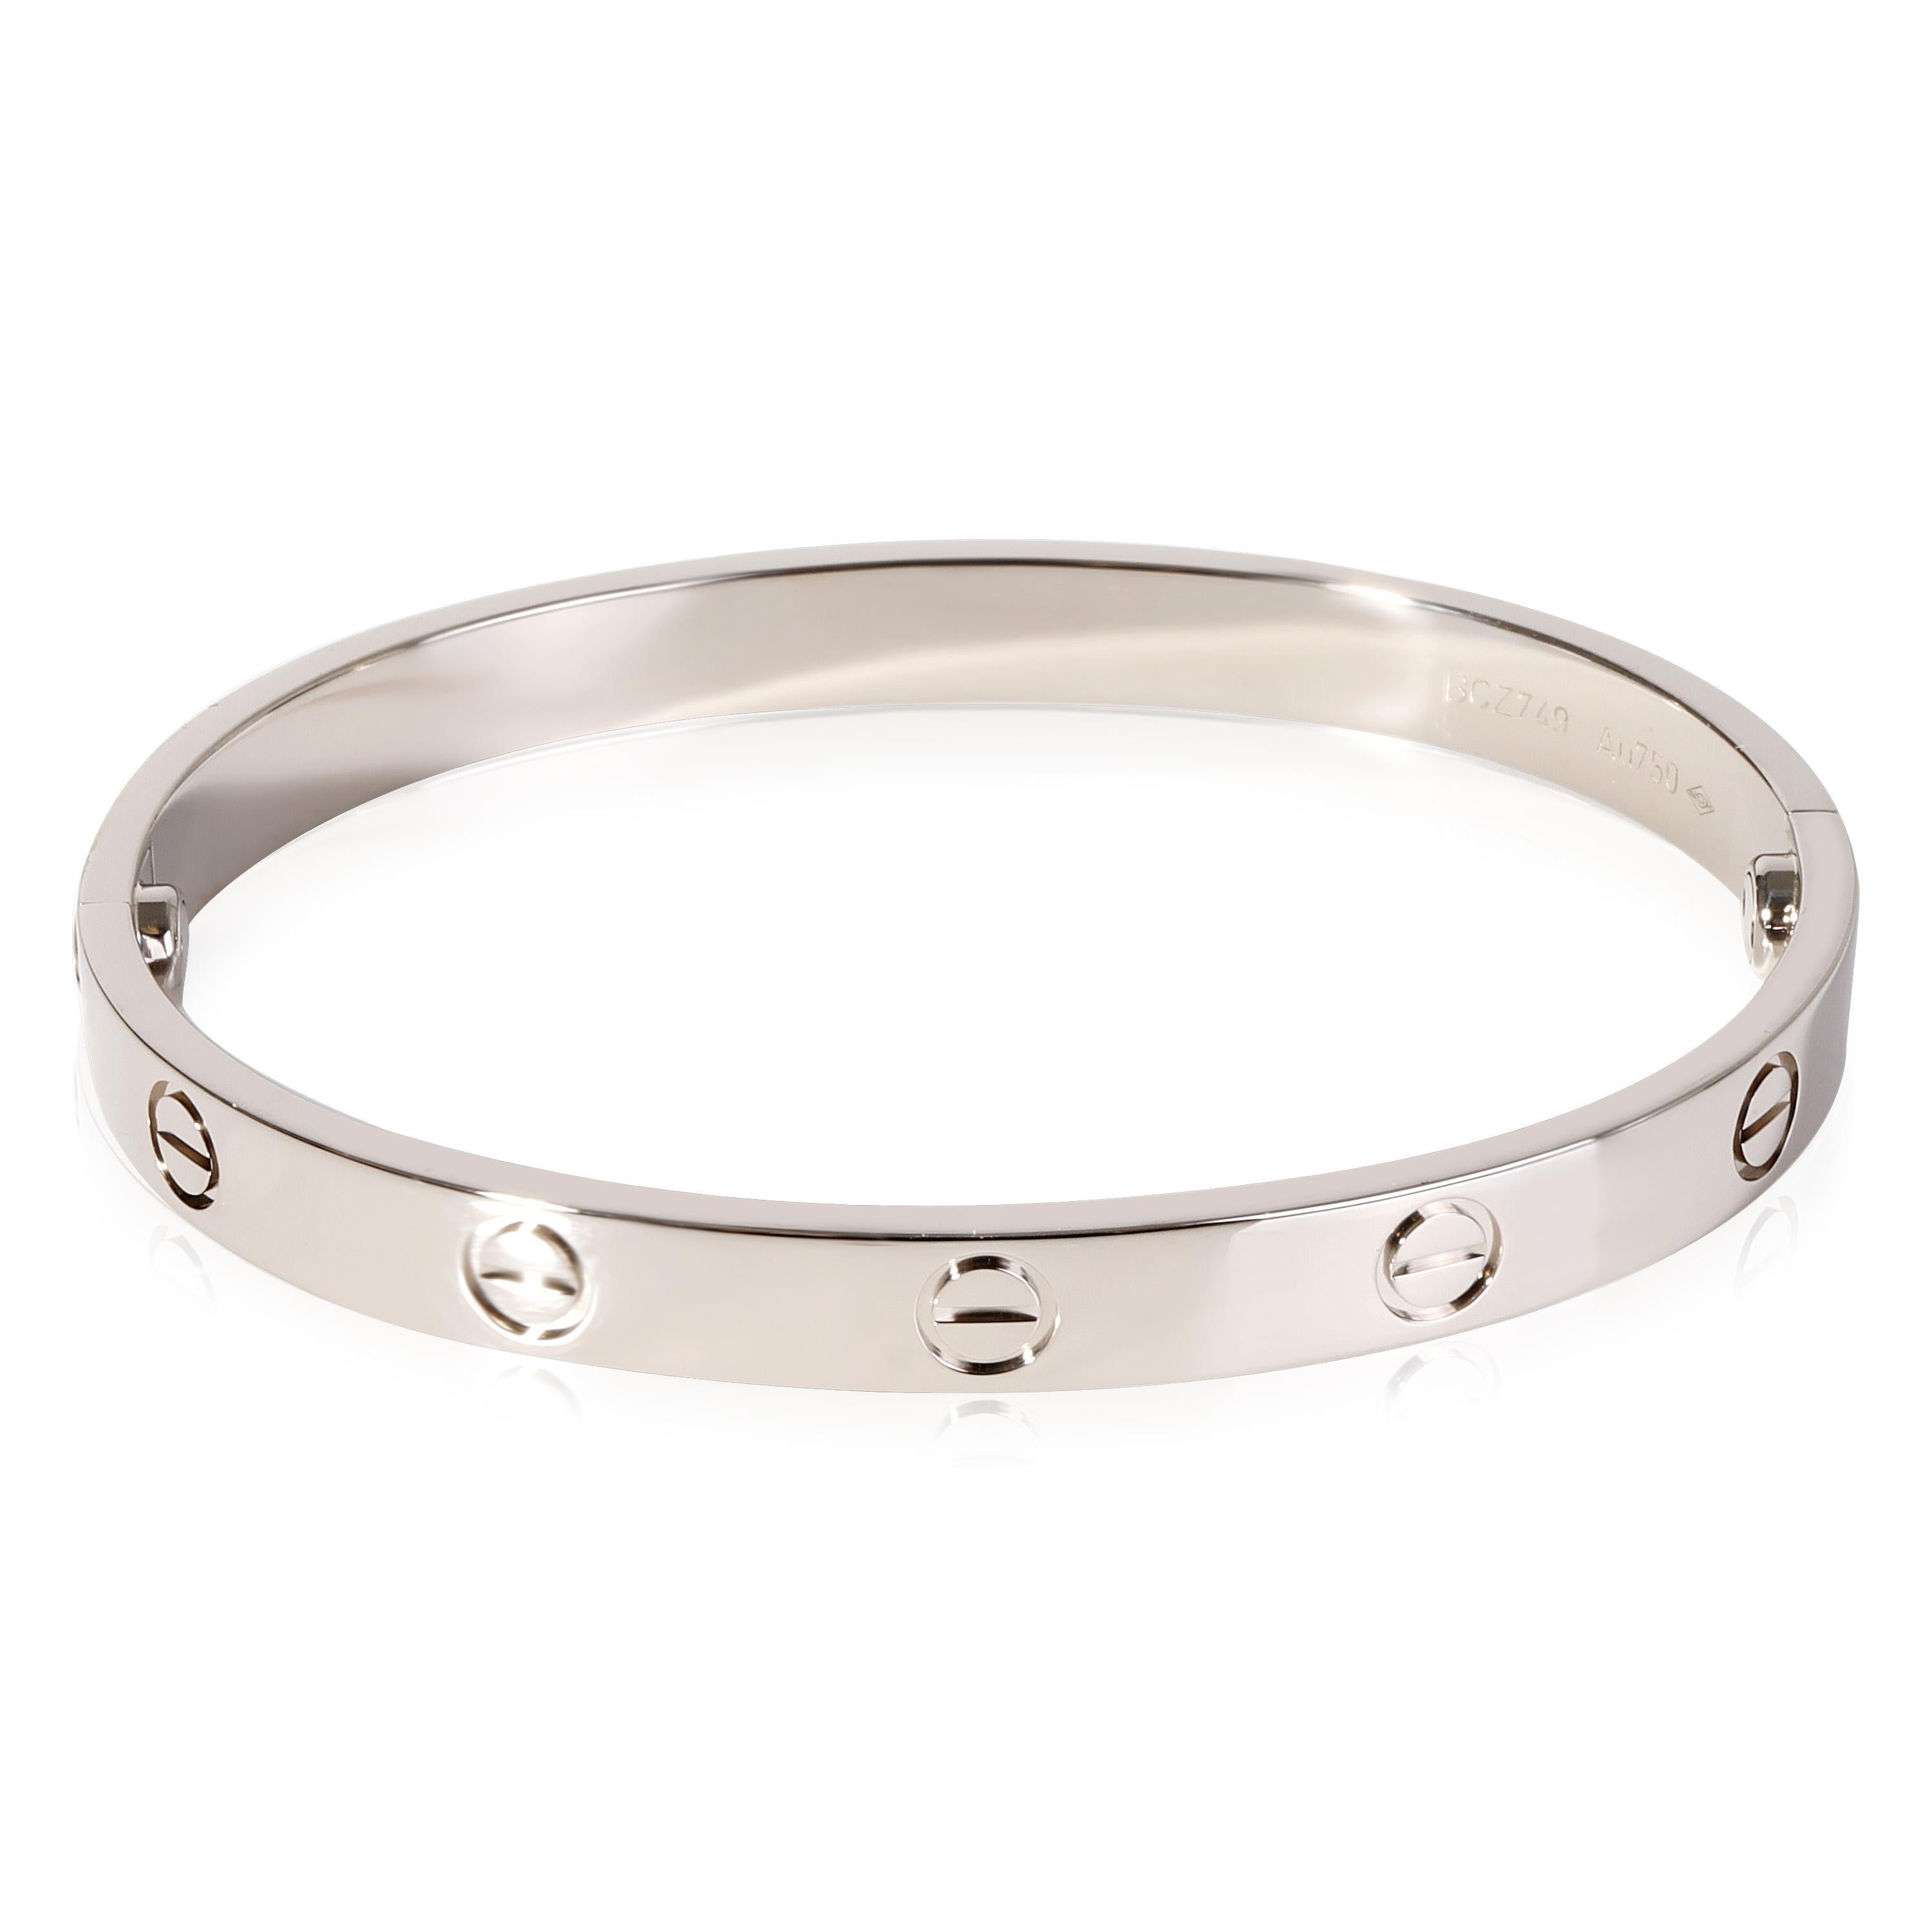 Cartier LOVE Bracelet in 18k White Gold

PRIMARY DETAILS
SKU: 117345
Listing Title: Cartier LOVE Bracelet in 18k White Gold
Condition Description: Retails for 7400 USD. In excellent condition and recently polished. Cartier Size 17. Comes with Box,